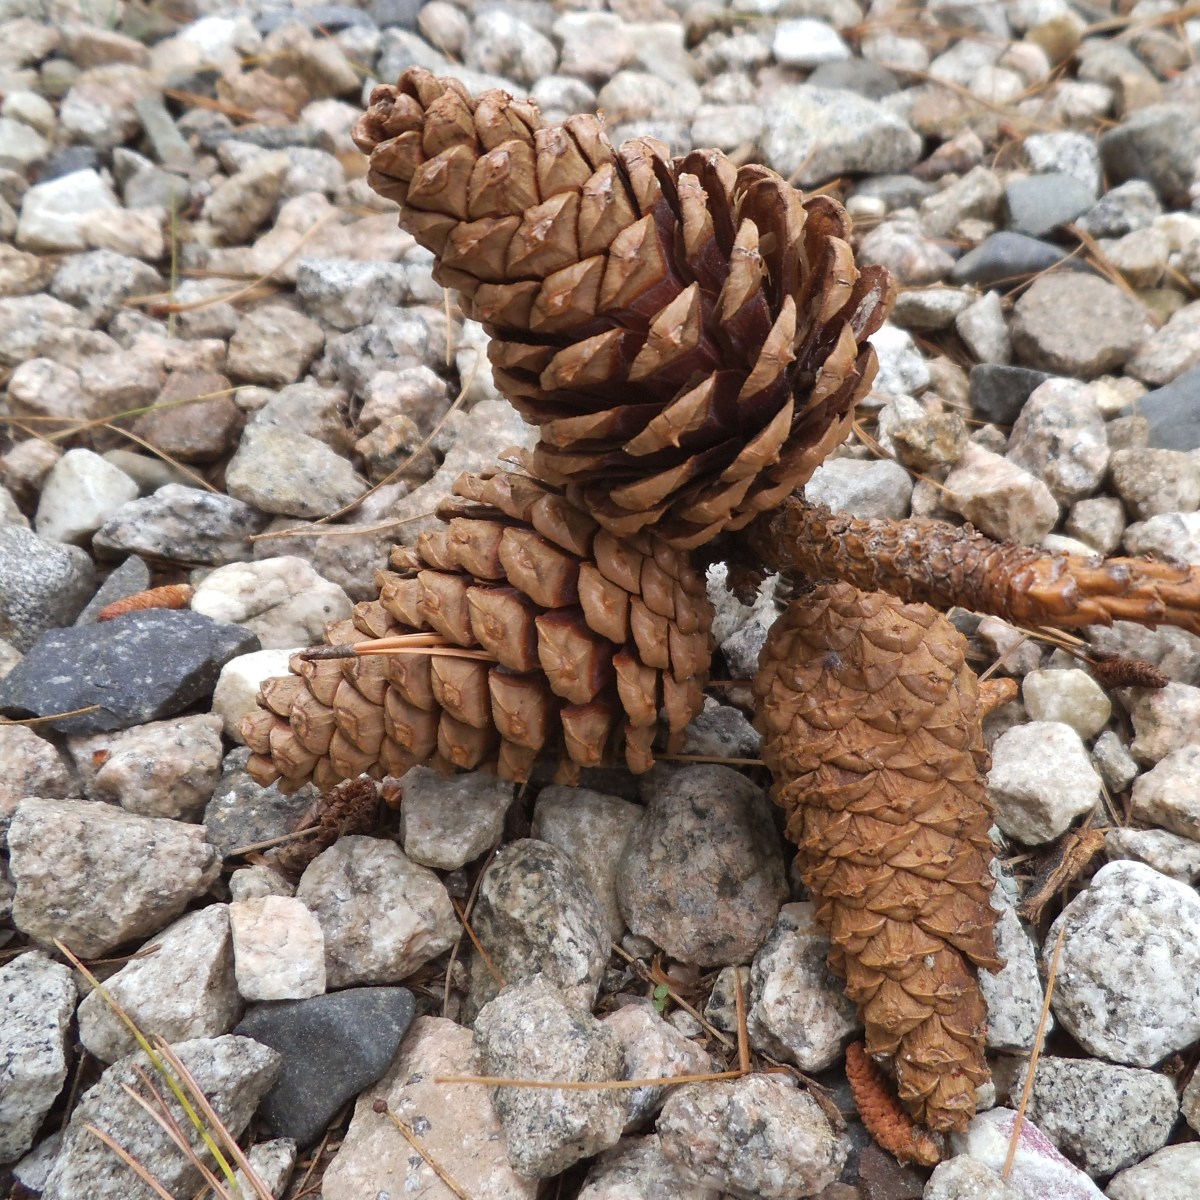 I prefer the pine cones that are more rounded. These are a little too elongated for my taste.